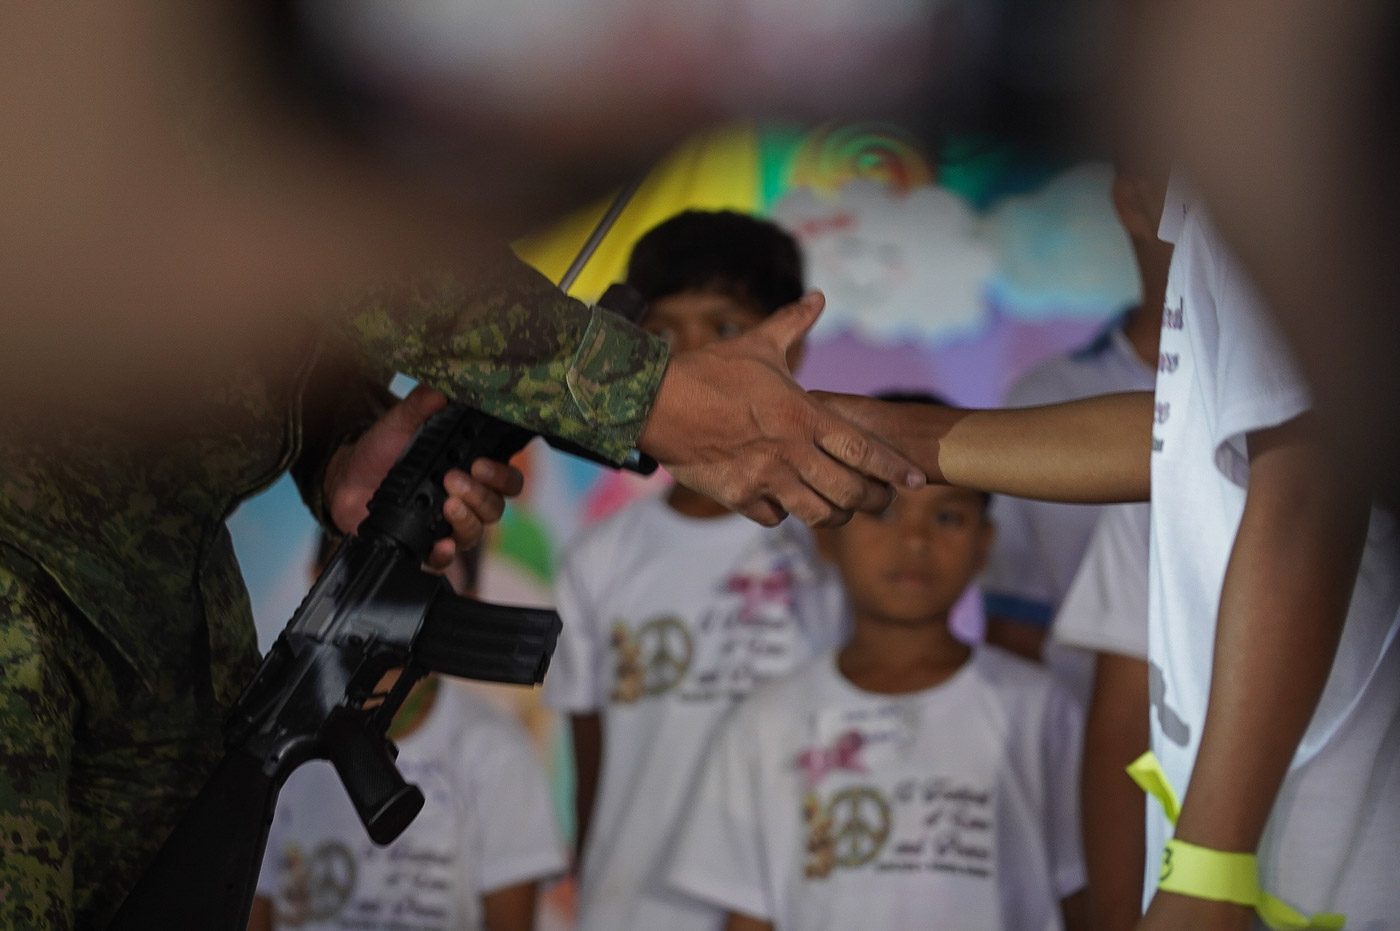 SUPPORT FOR PEACE. A military officer shakes the hand of a child who had just turne over a toy gun, symbolic of the Basilan youth's support for peace in the region 